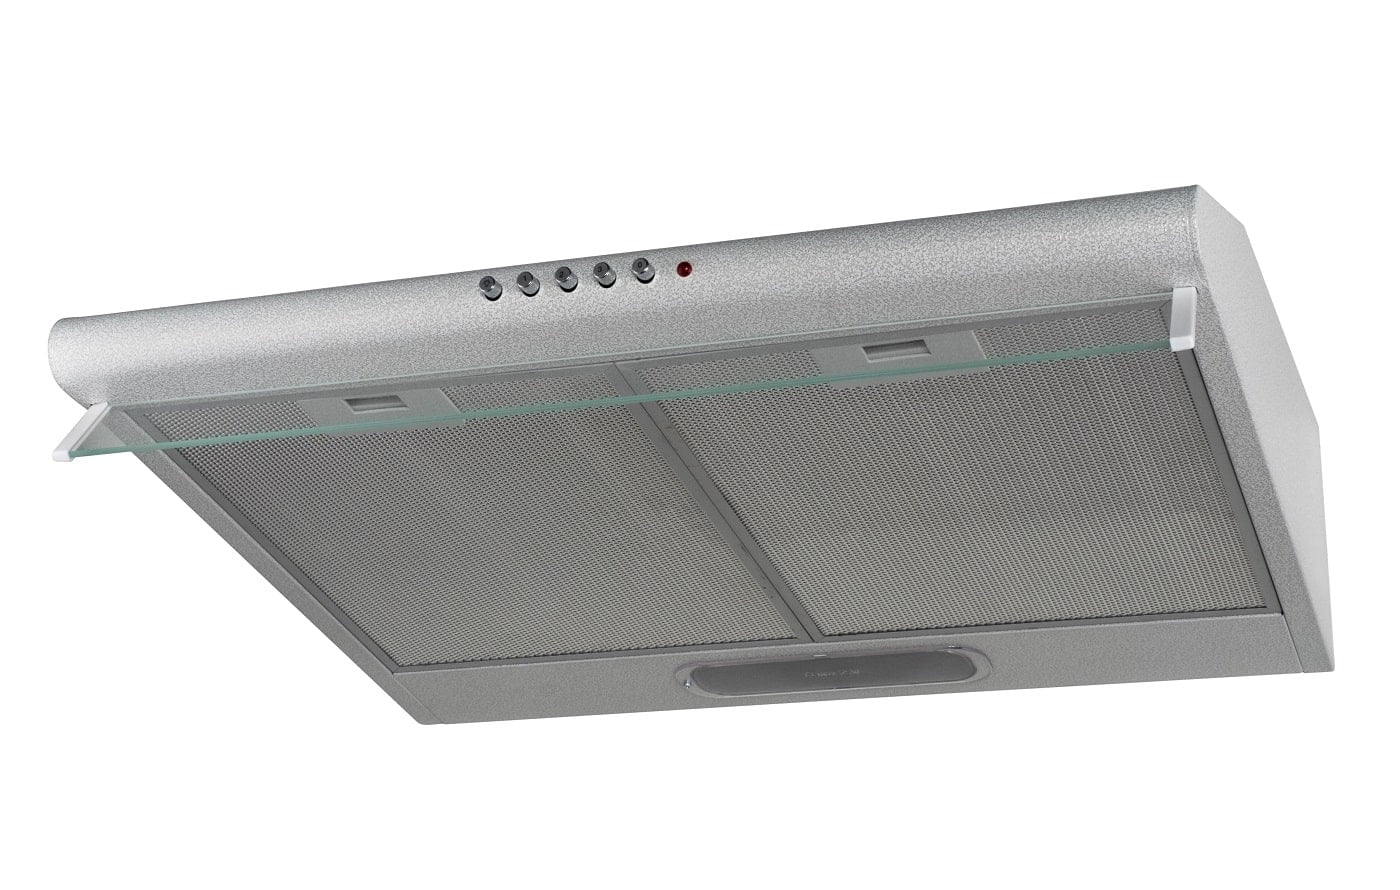 Cooker hood. The design is flat, wall mounted. Grey colour. Isolated.